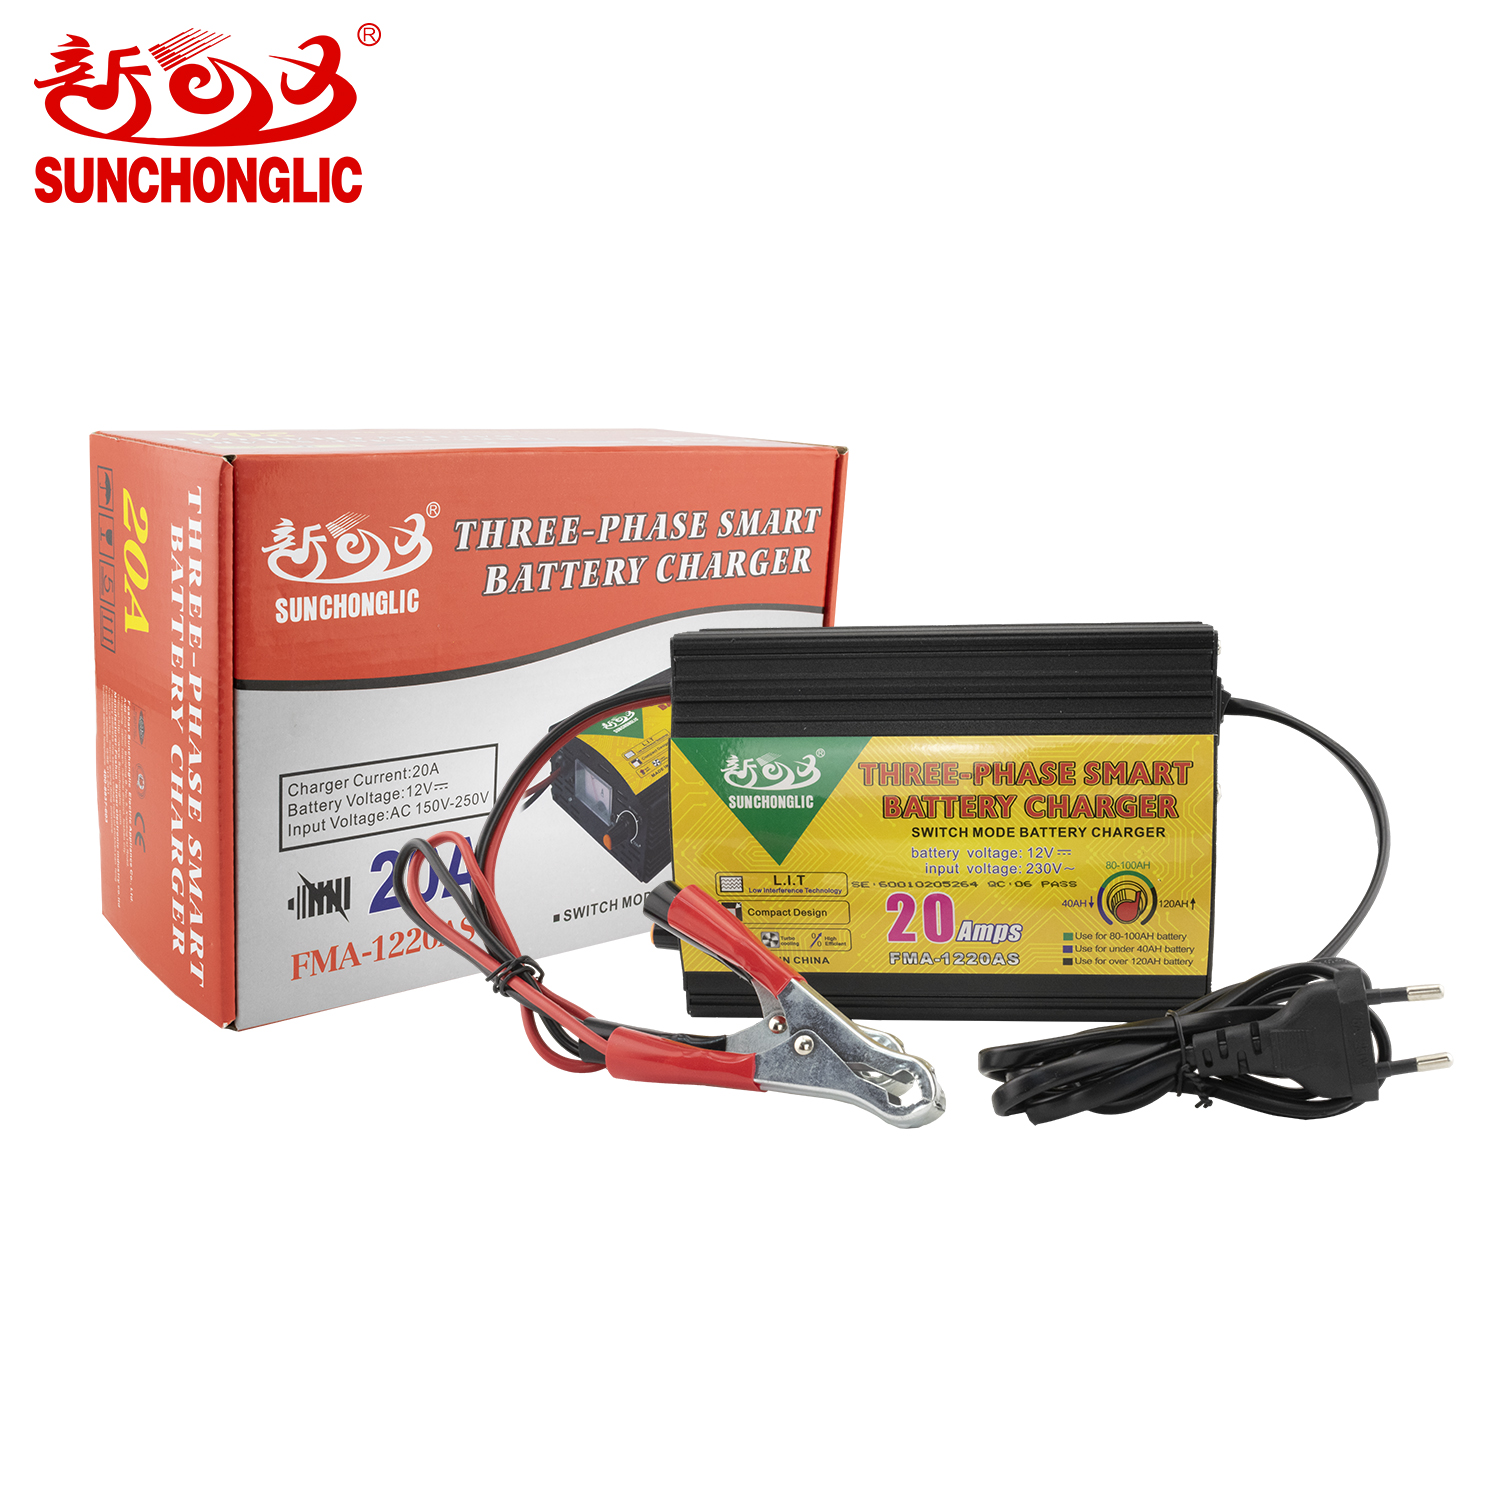 Battery Charger 20A-12VDC